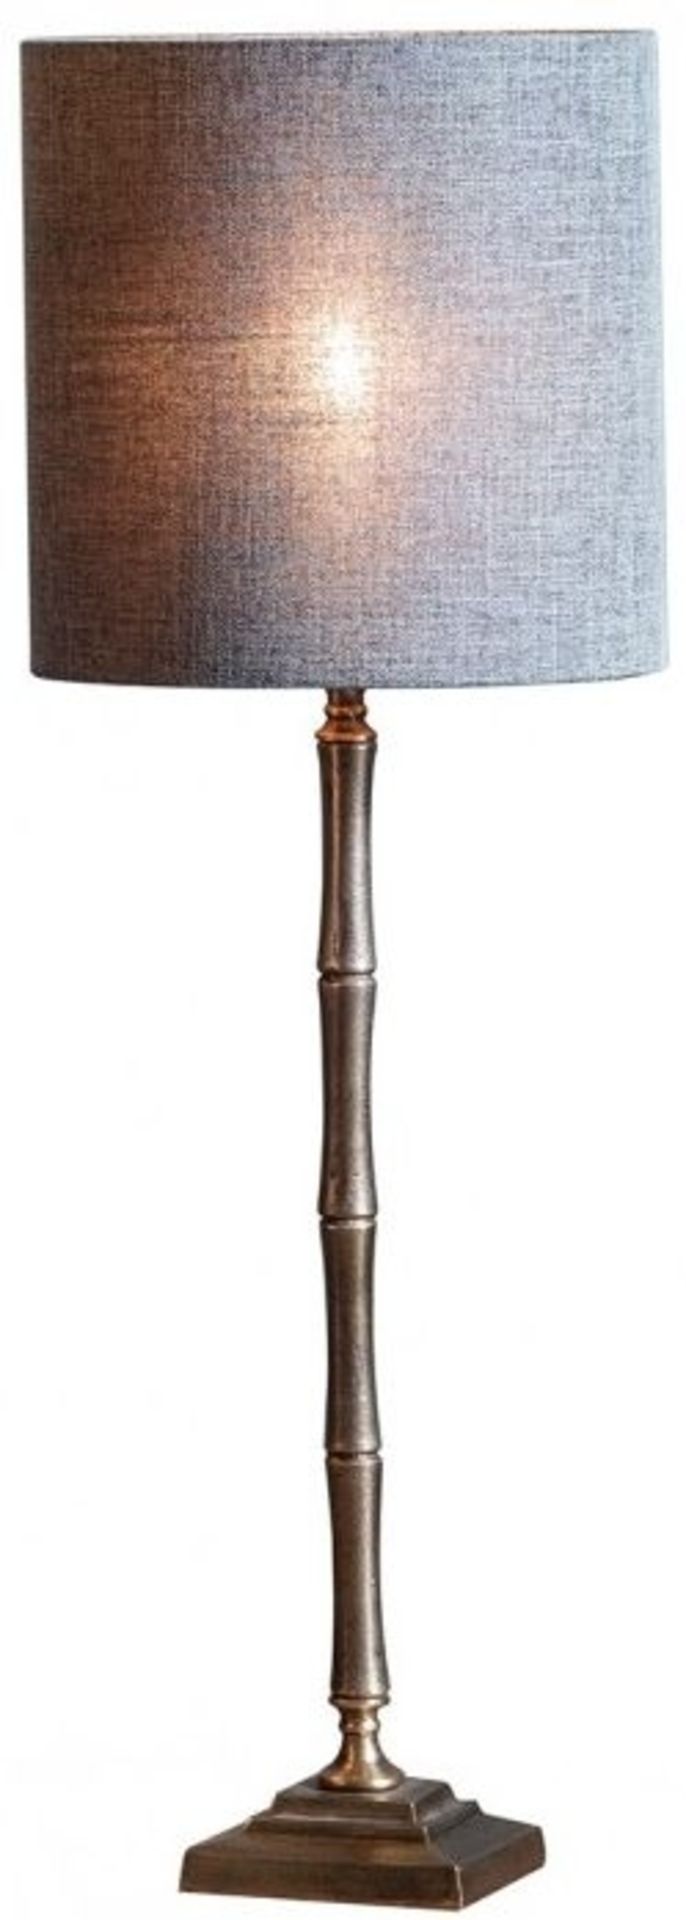 Vittoria Table Lamp Base Only a Classic table lamp with a broned effect stem and base Base Only 14 x - Image 2 of 2